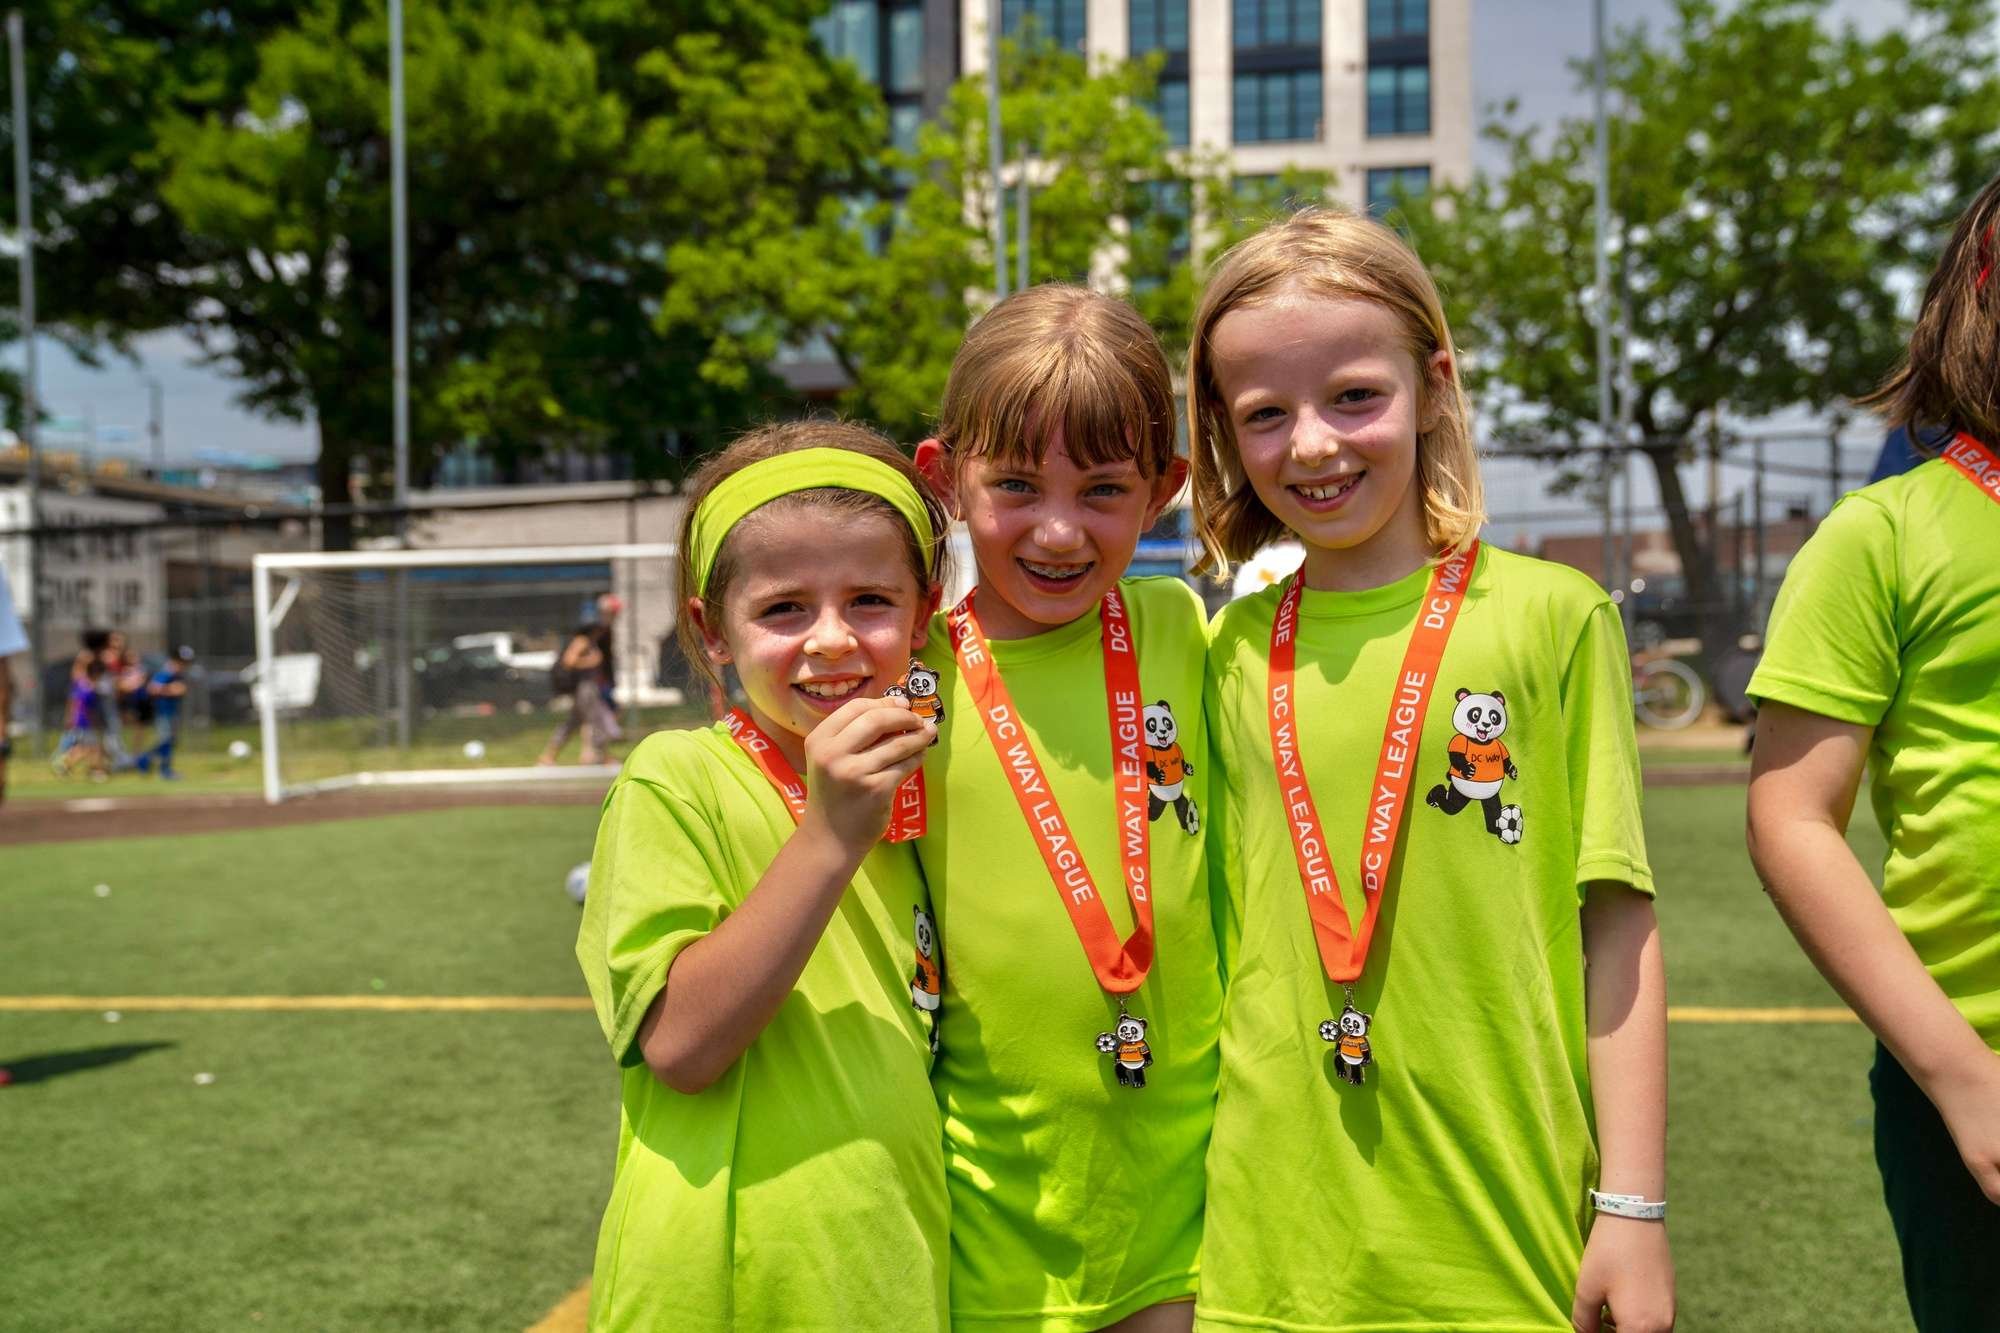 Dc-way-soccer-club-for-kids-in-washington-dc-capitol-hill-league-at-brentwood-hamilton-park-06-03-2023 0199.jpg